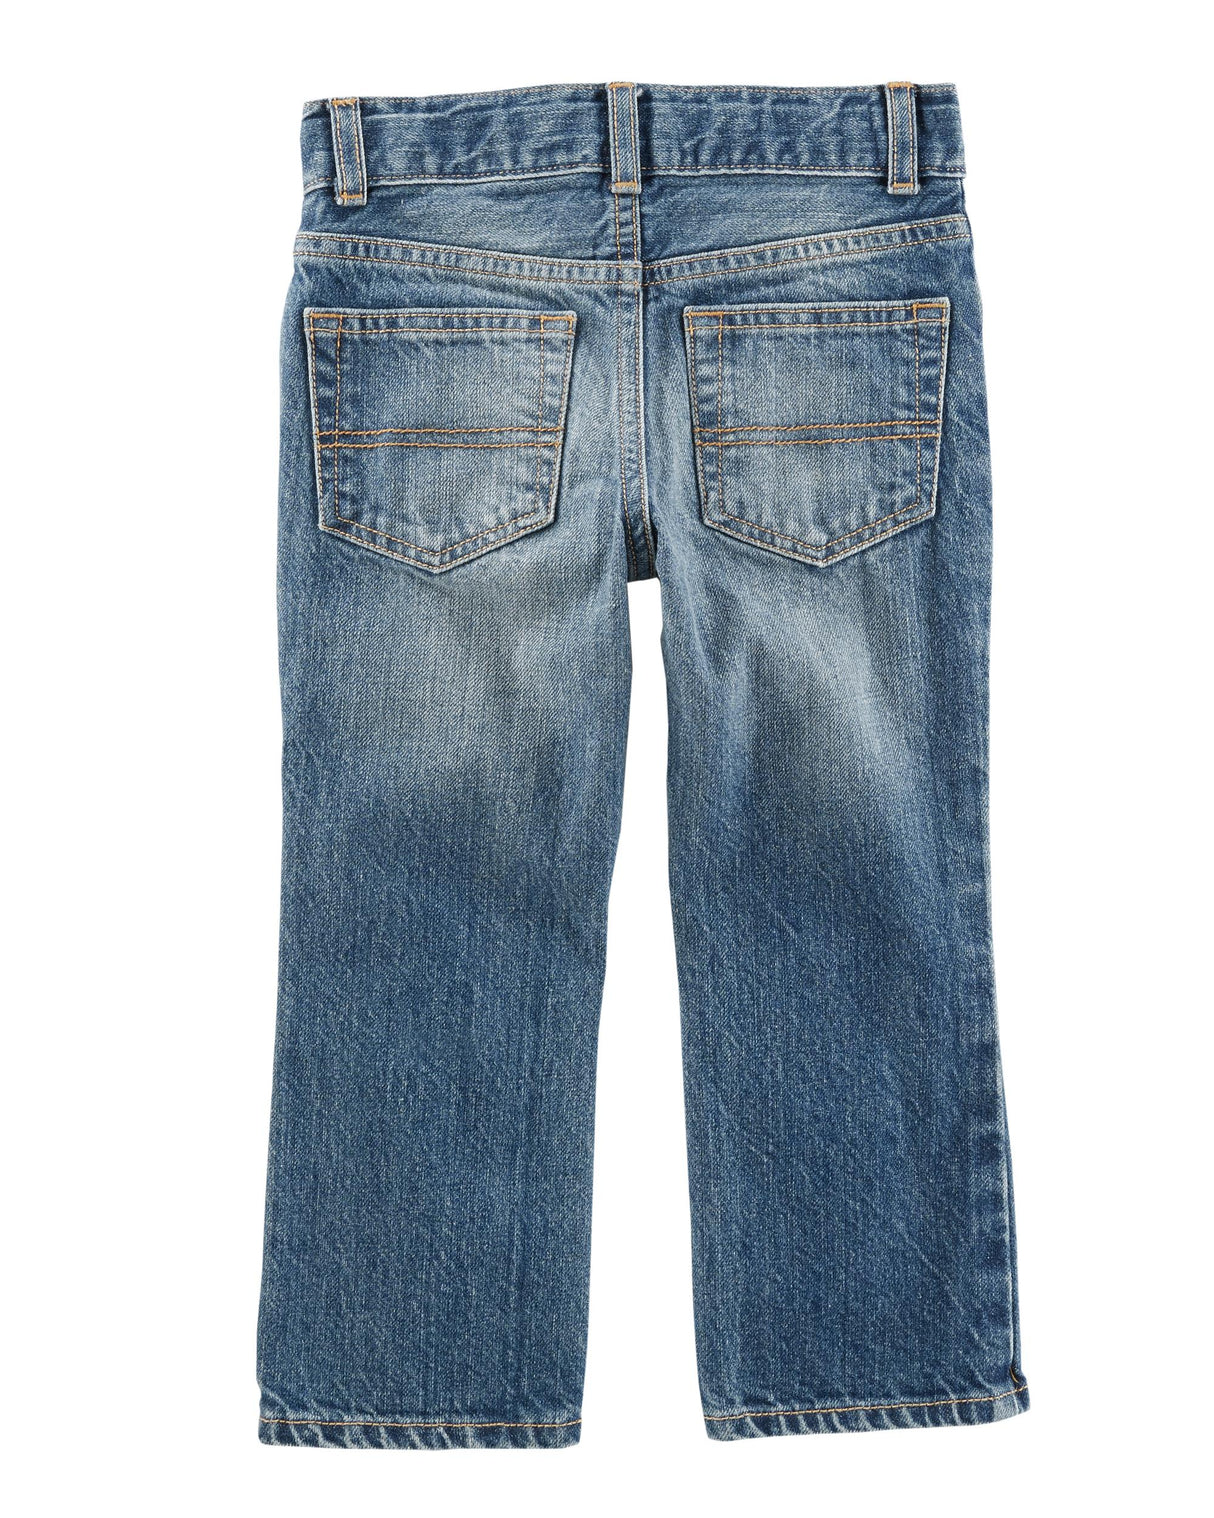 Bootcut Jeans - Heritage Light Wash